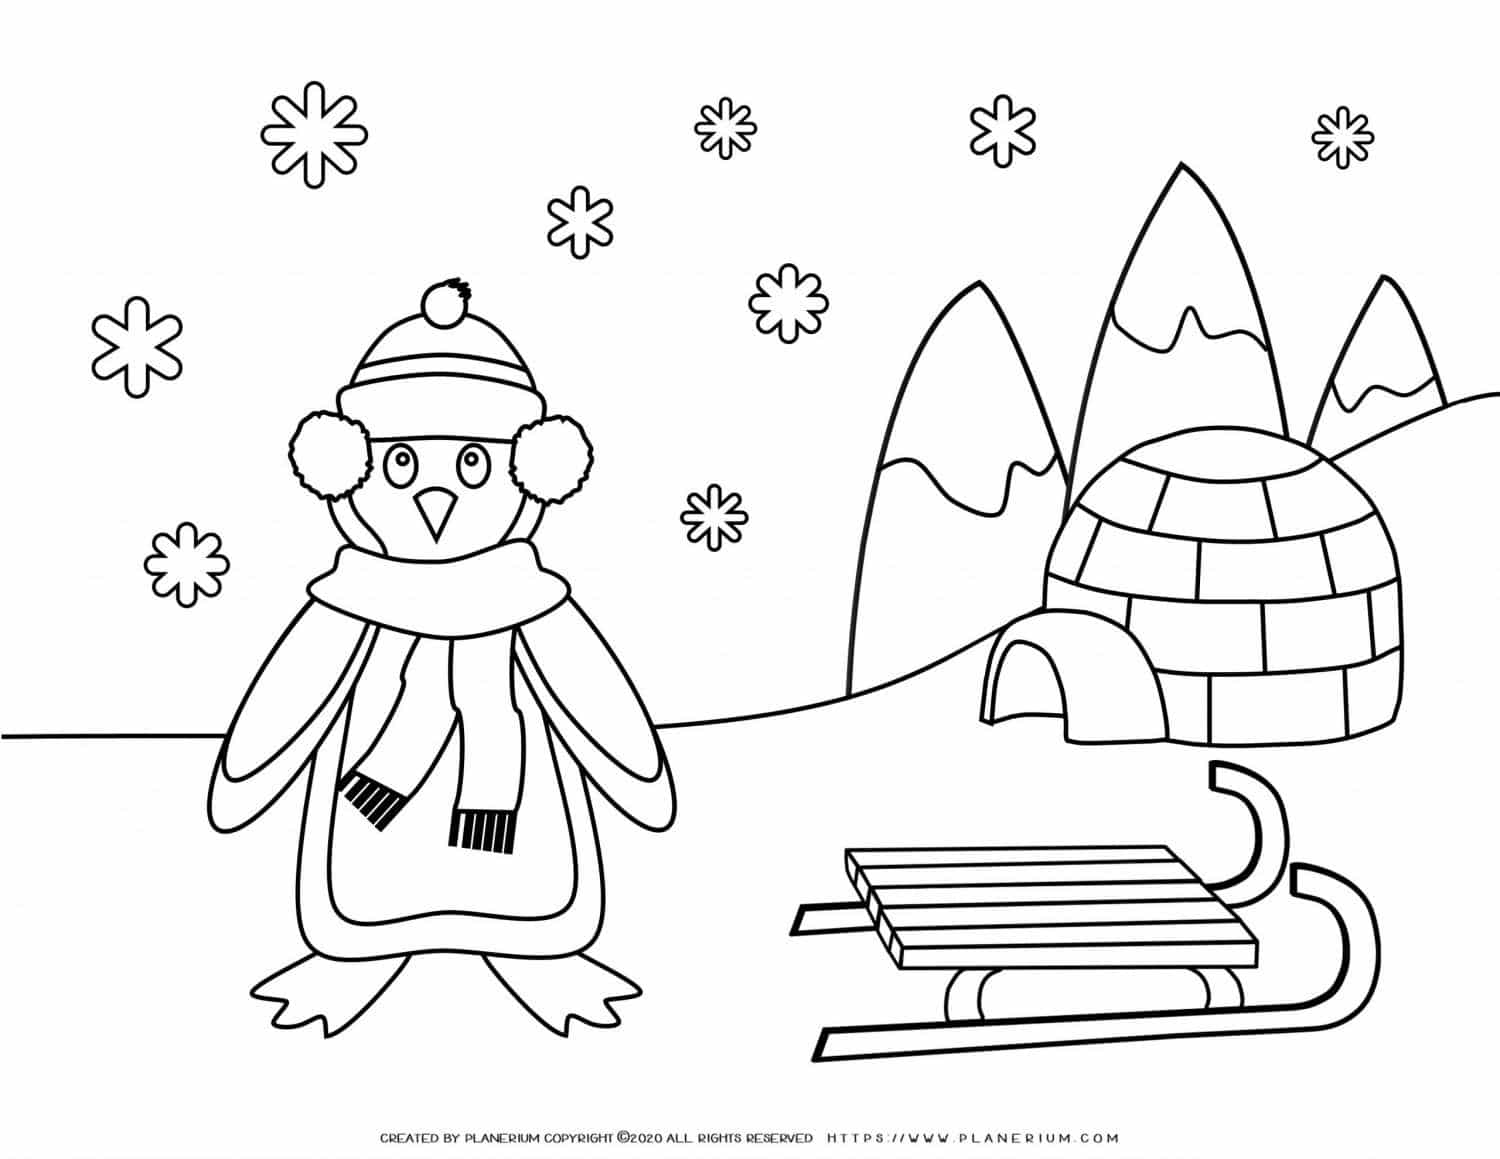 Winter   Coloring pages   Penguin in Snow   Planerium